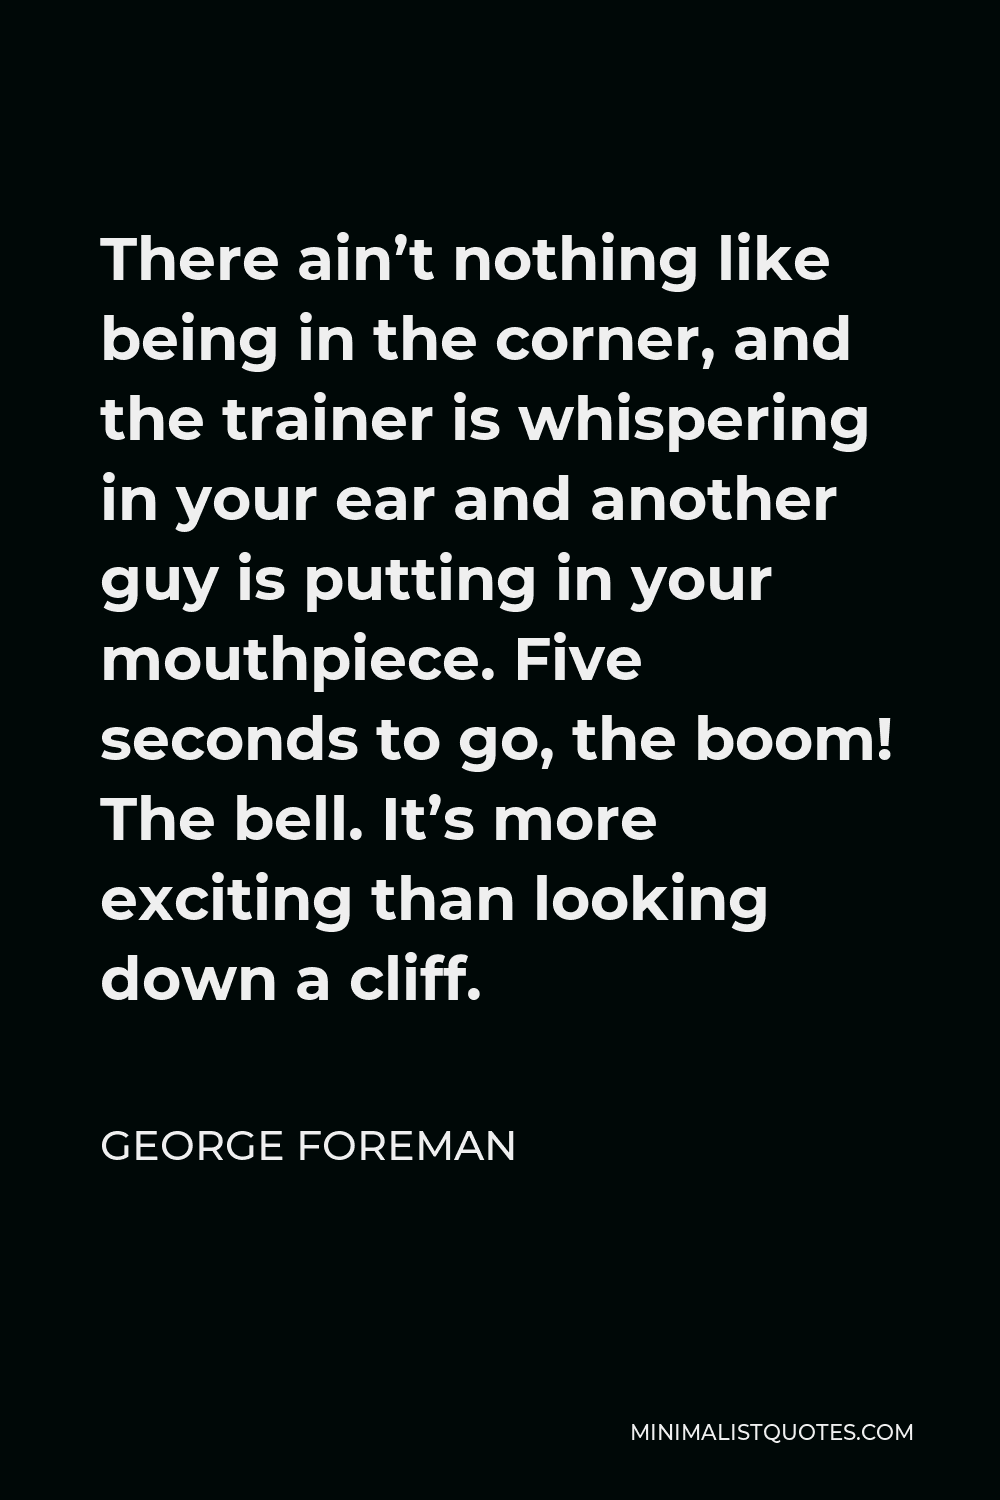 George Foreman Quote - There ain’t nothing like being in the corner, and the trainer is whispering in your ear and another guy is putting in your mouthpiece. Five seconds to go, the boom! The bell. It’s more exciting than looking down a cliff.